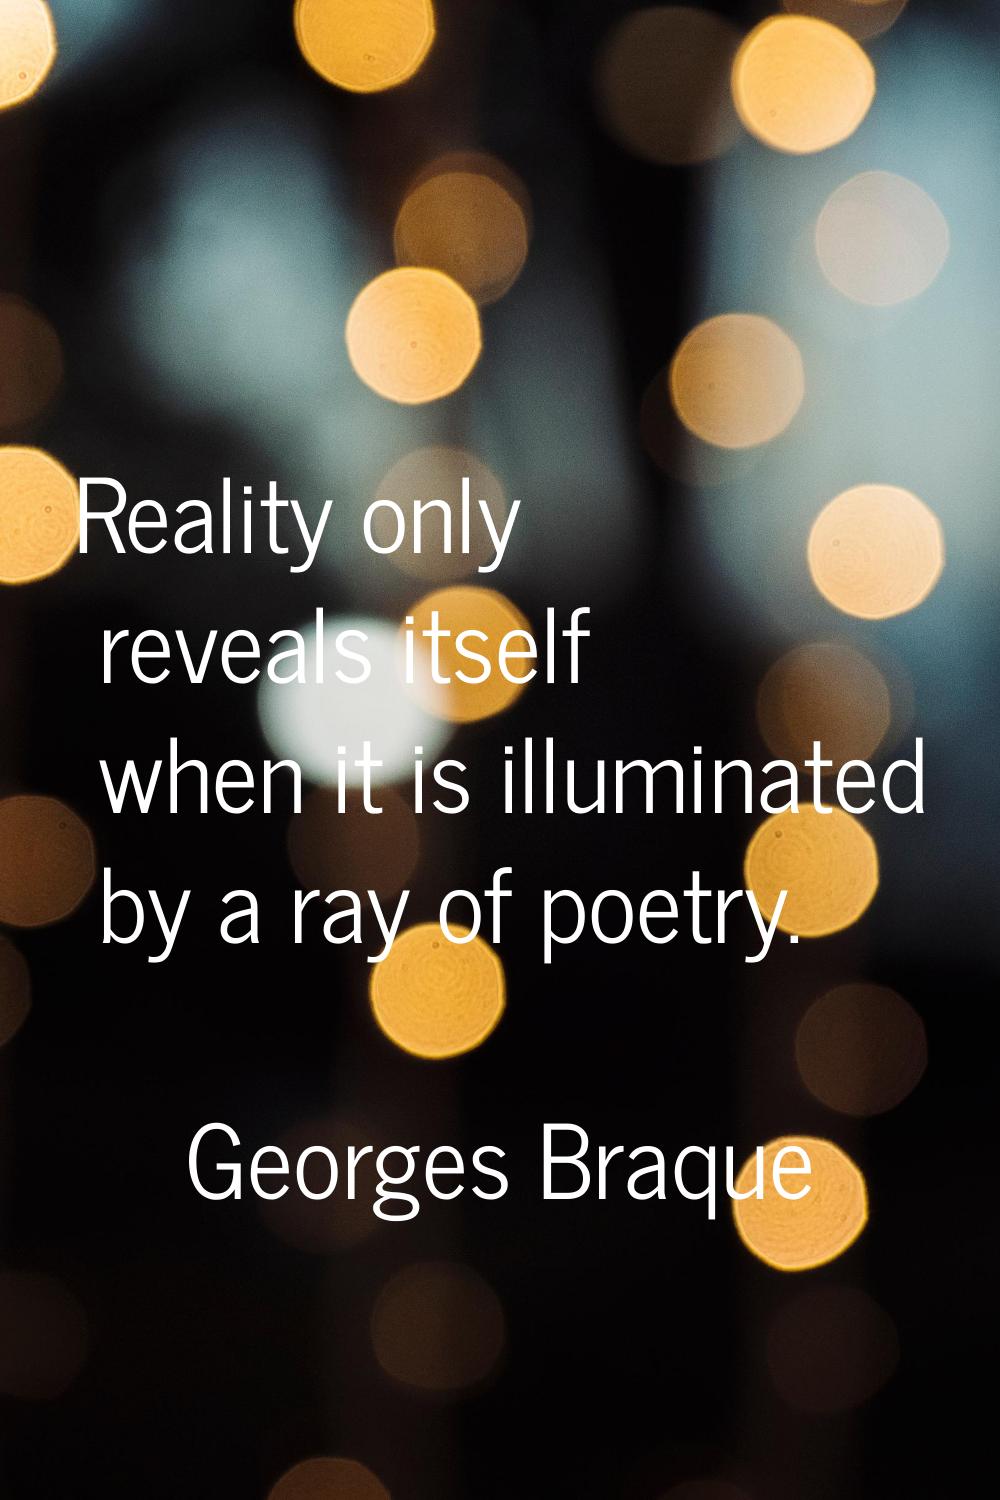 Reality only reveals itself when it is illuminated by a ray of poetry.